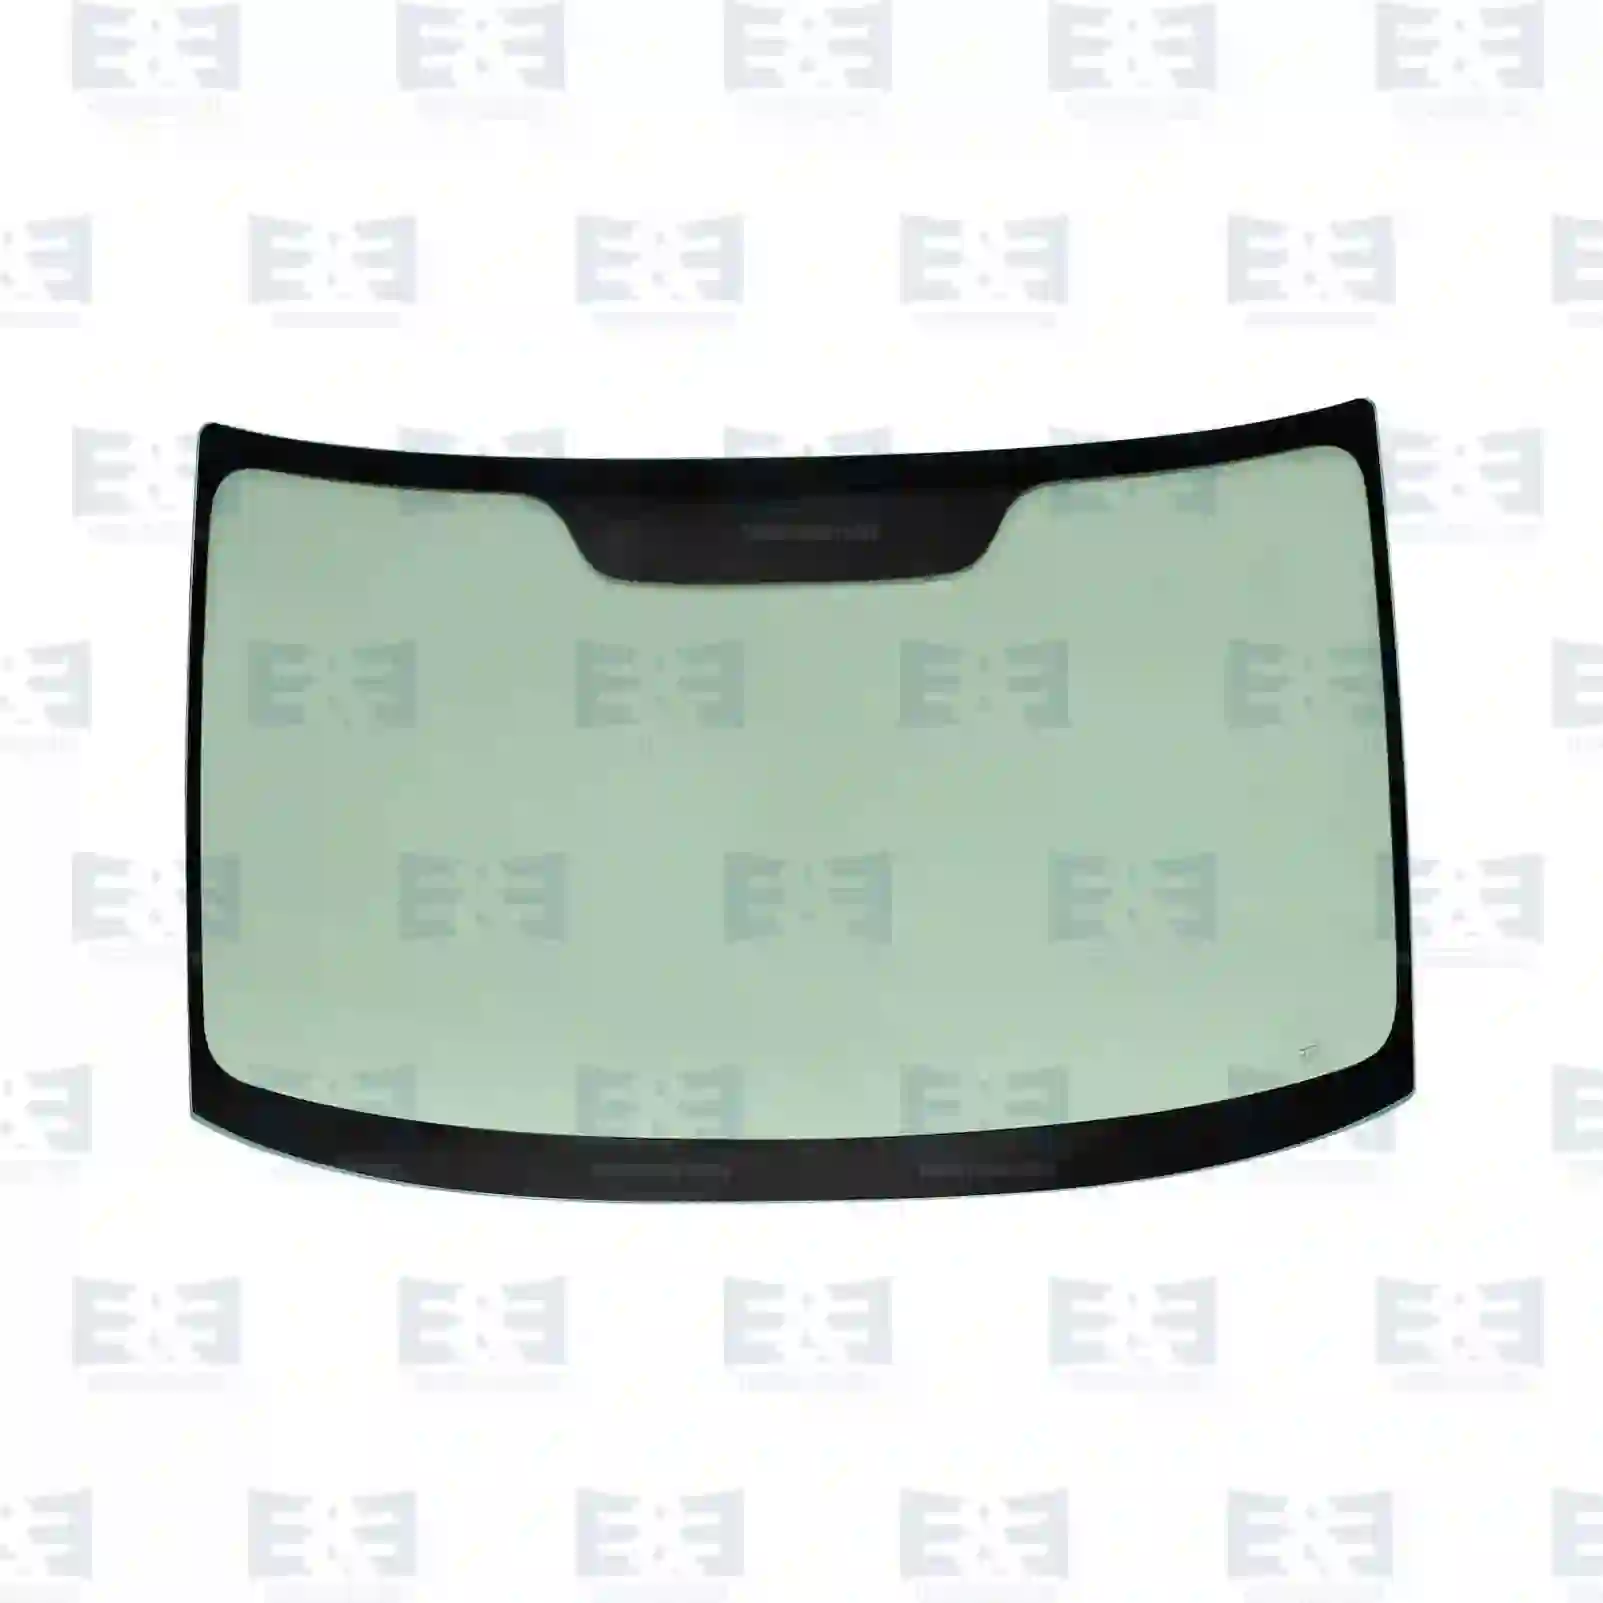 Windshield, tinted green, single package, 2E2280748, 7700351157 ||  2E2280748 E&E Truck Spare Parts | Truck Spare Parts, Auotomotive Spare Parts Windshield, tinted green, single package, 2E2280748, 7700351157 ||  2E2280748 E&E Truck Spare Parts | Truck Spare Parts, Auotomotive Spare Parts